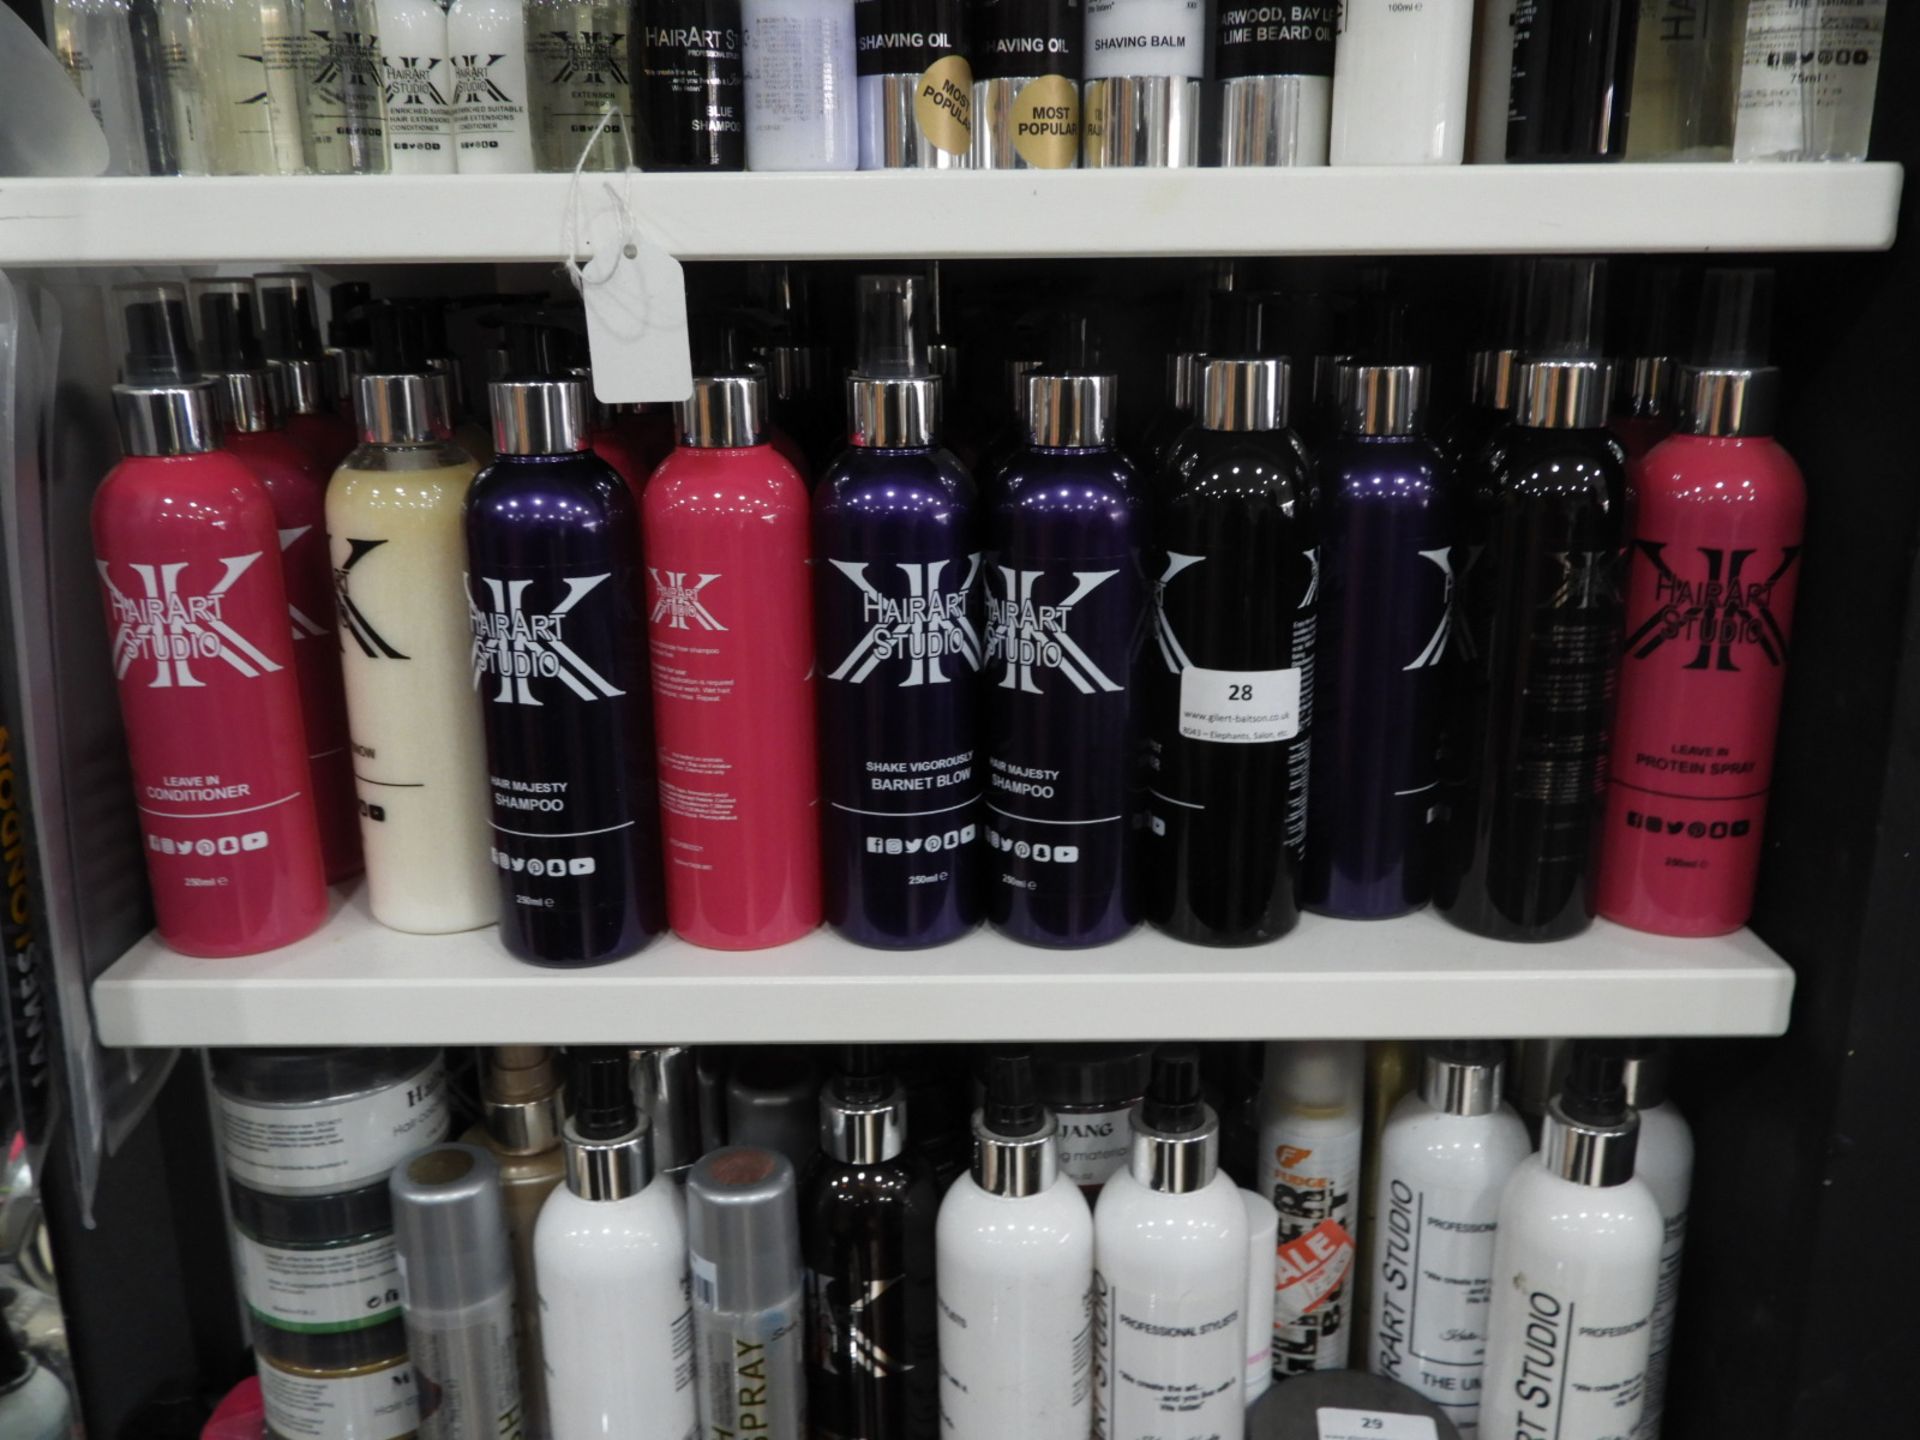 Quantity of Hair Art Studio Products Including Sha